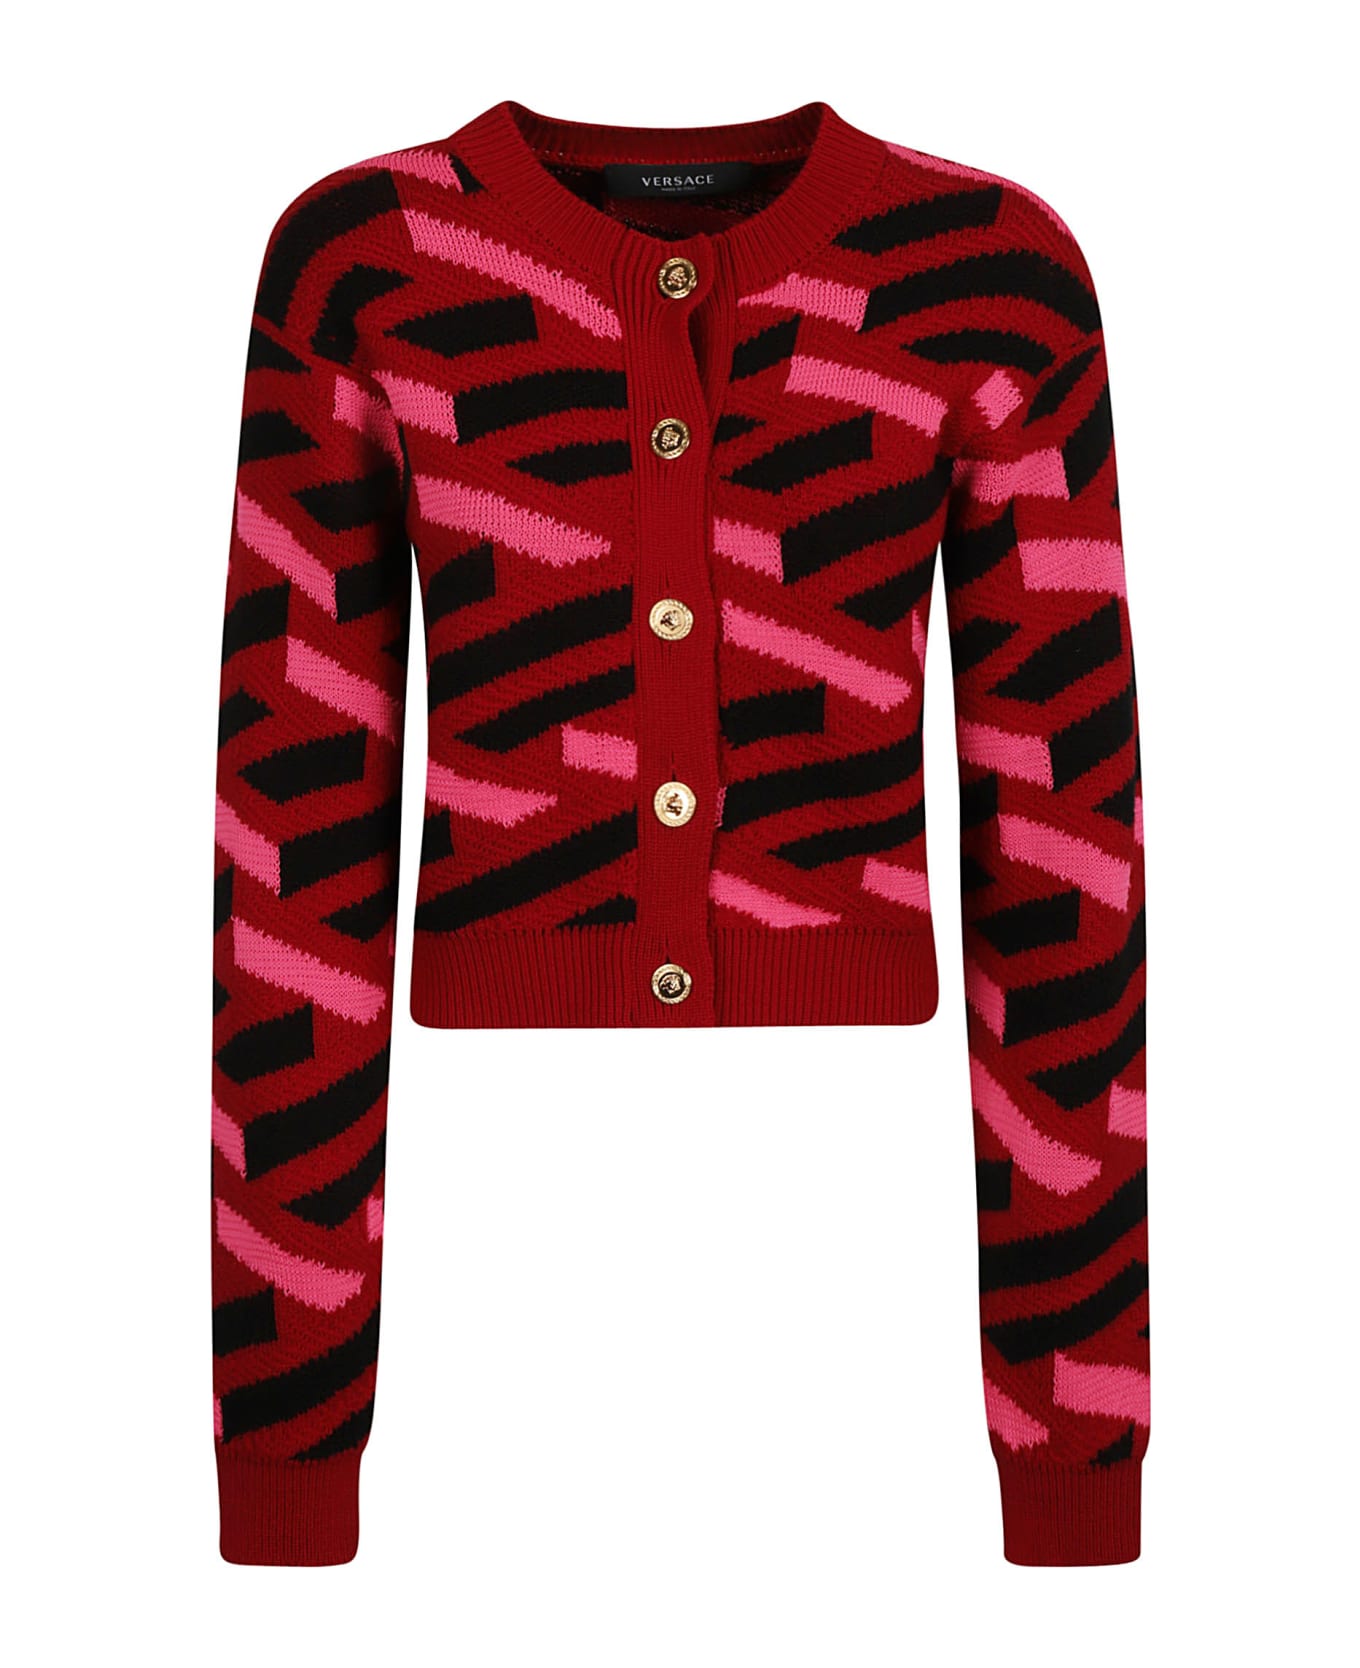 Versace Greca Texture Knit Sweater - Red/Fuxia